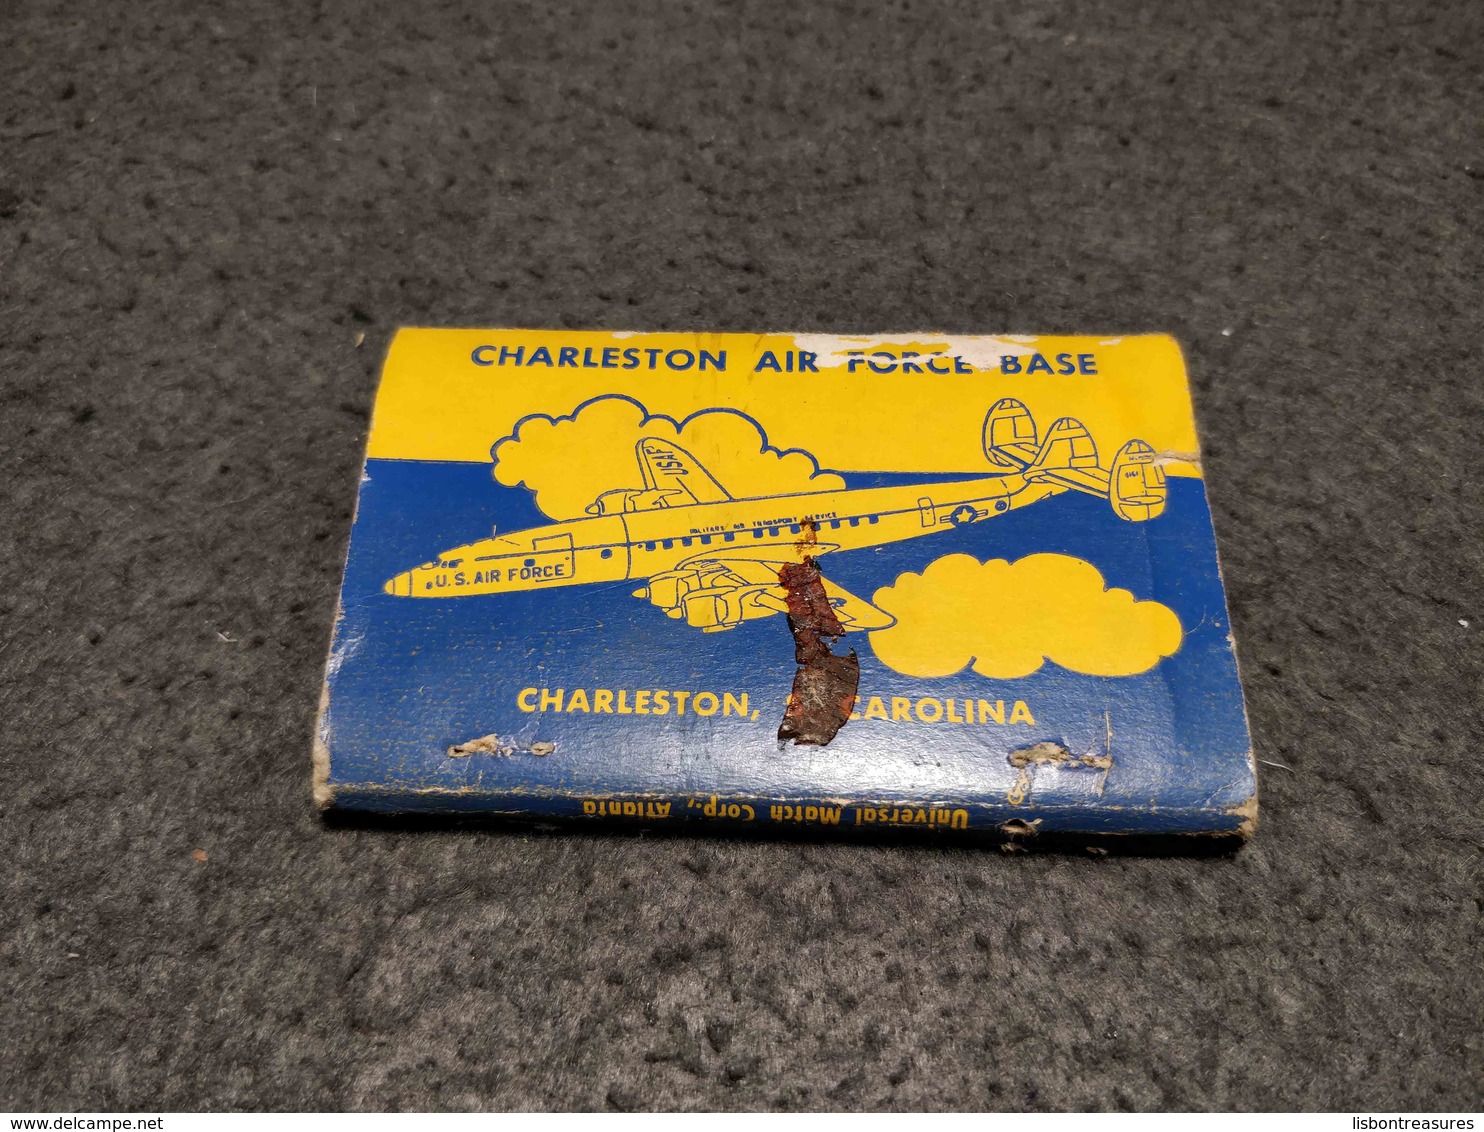 ANTIQUE MATCHBOX MATCHES LABEL ADVERTISING CHARLESTON AIR FORCE BASE MILITARY UNITED STATES - Boîtes D’allumettes